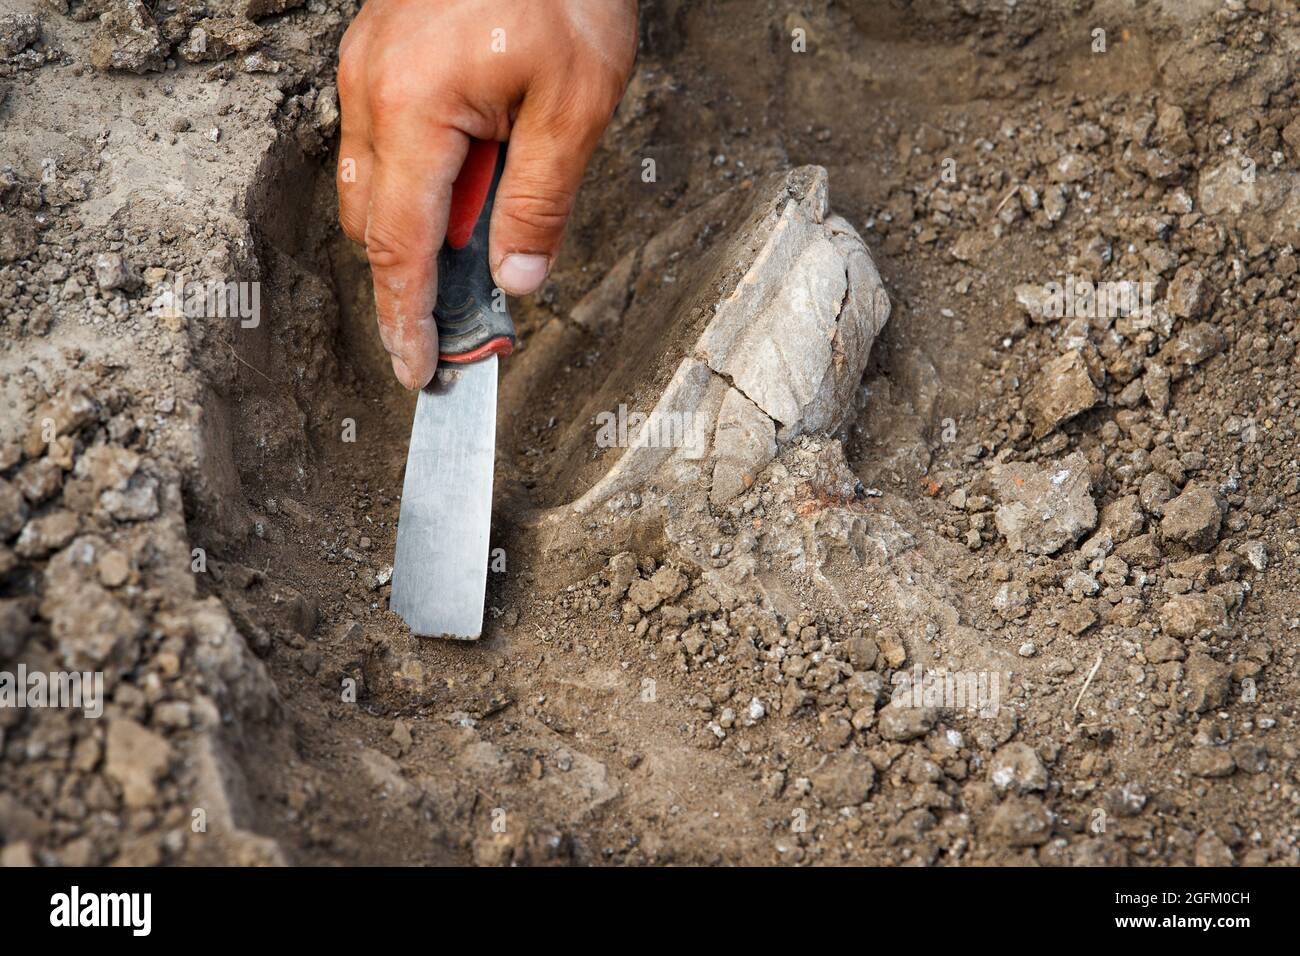 Archaeological excavations, archaeologists work, dig up an ancient clay artifact with special tools in soil Stock Photo